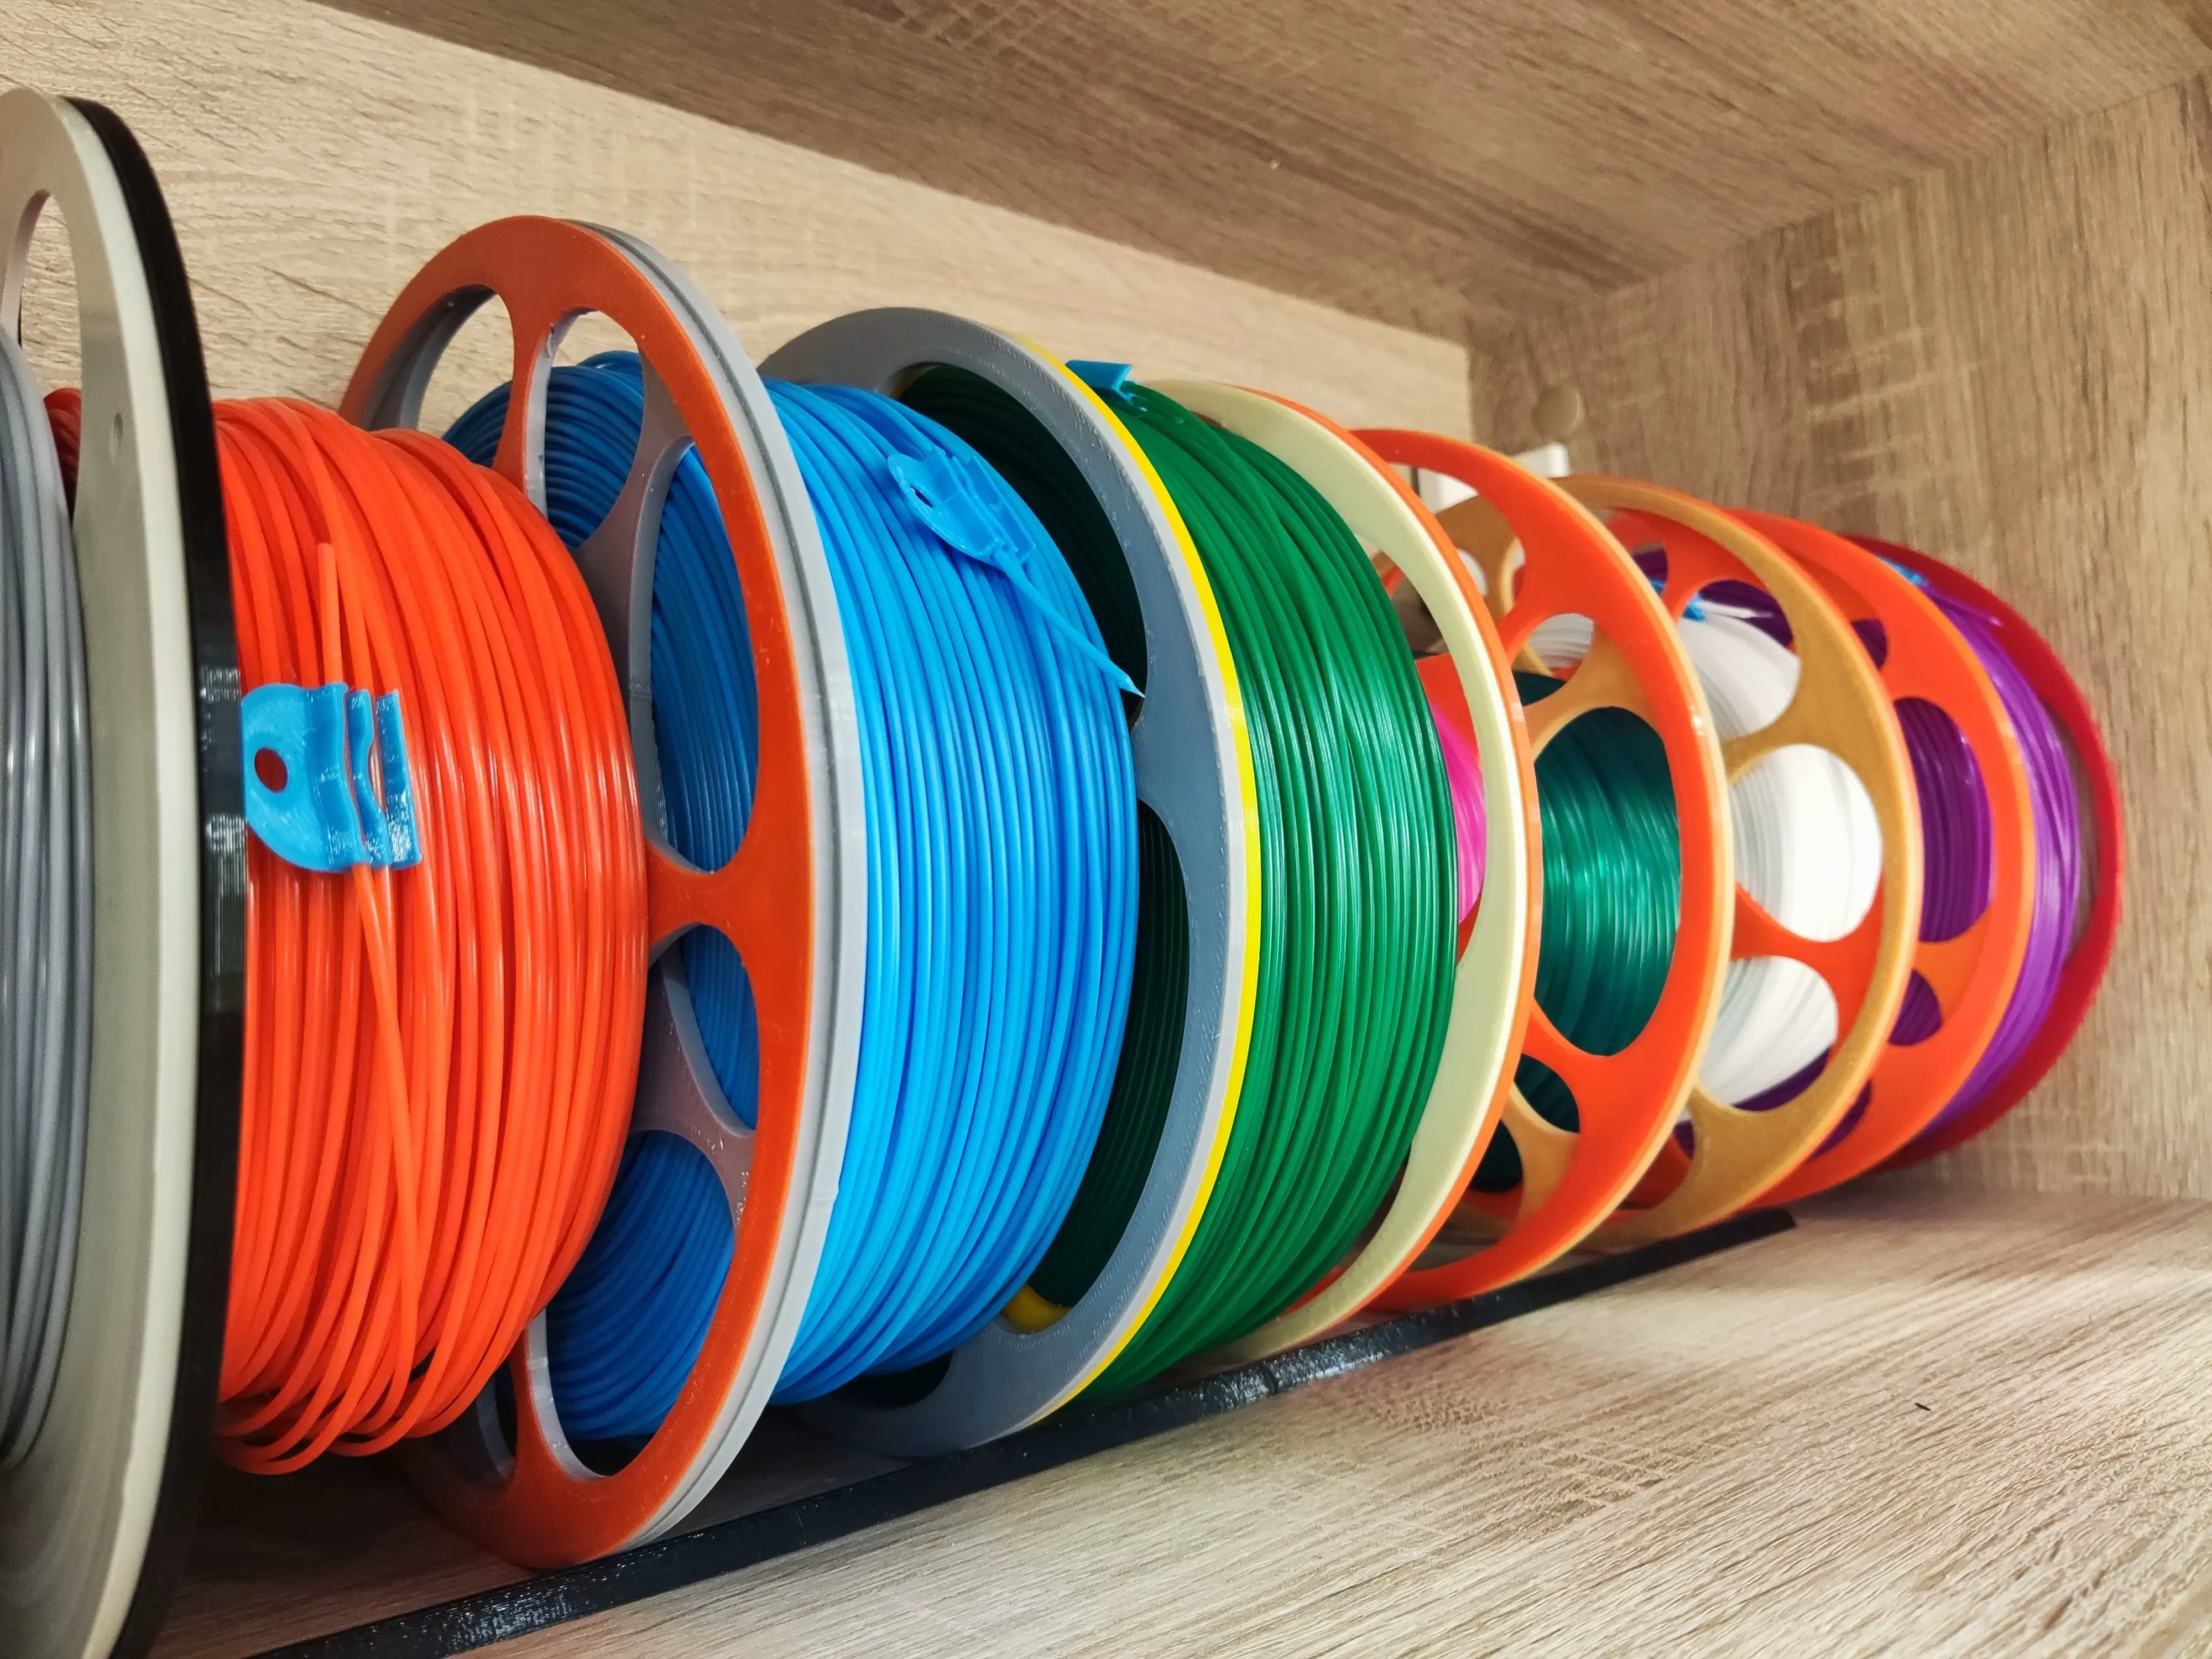 Collapsible spool for filament in skeins